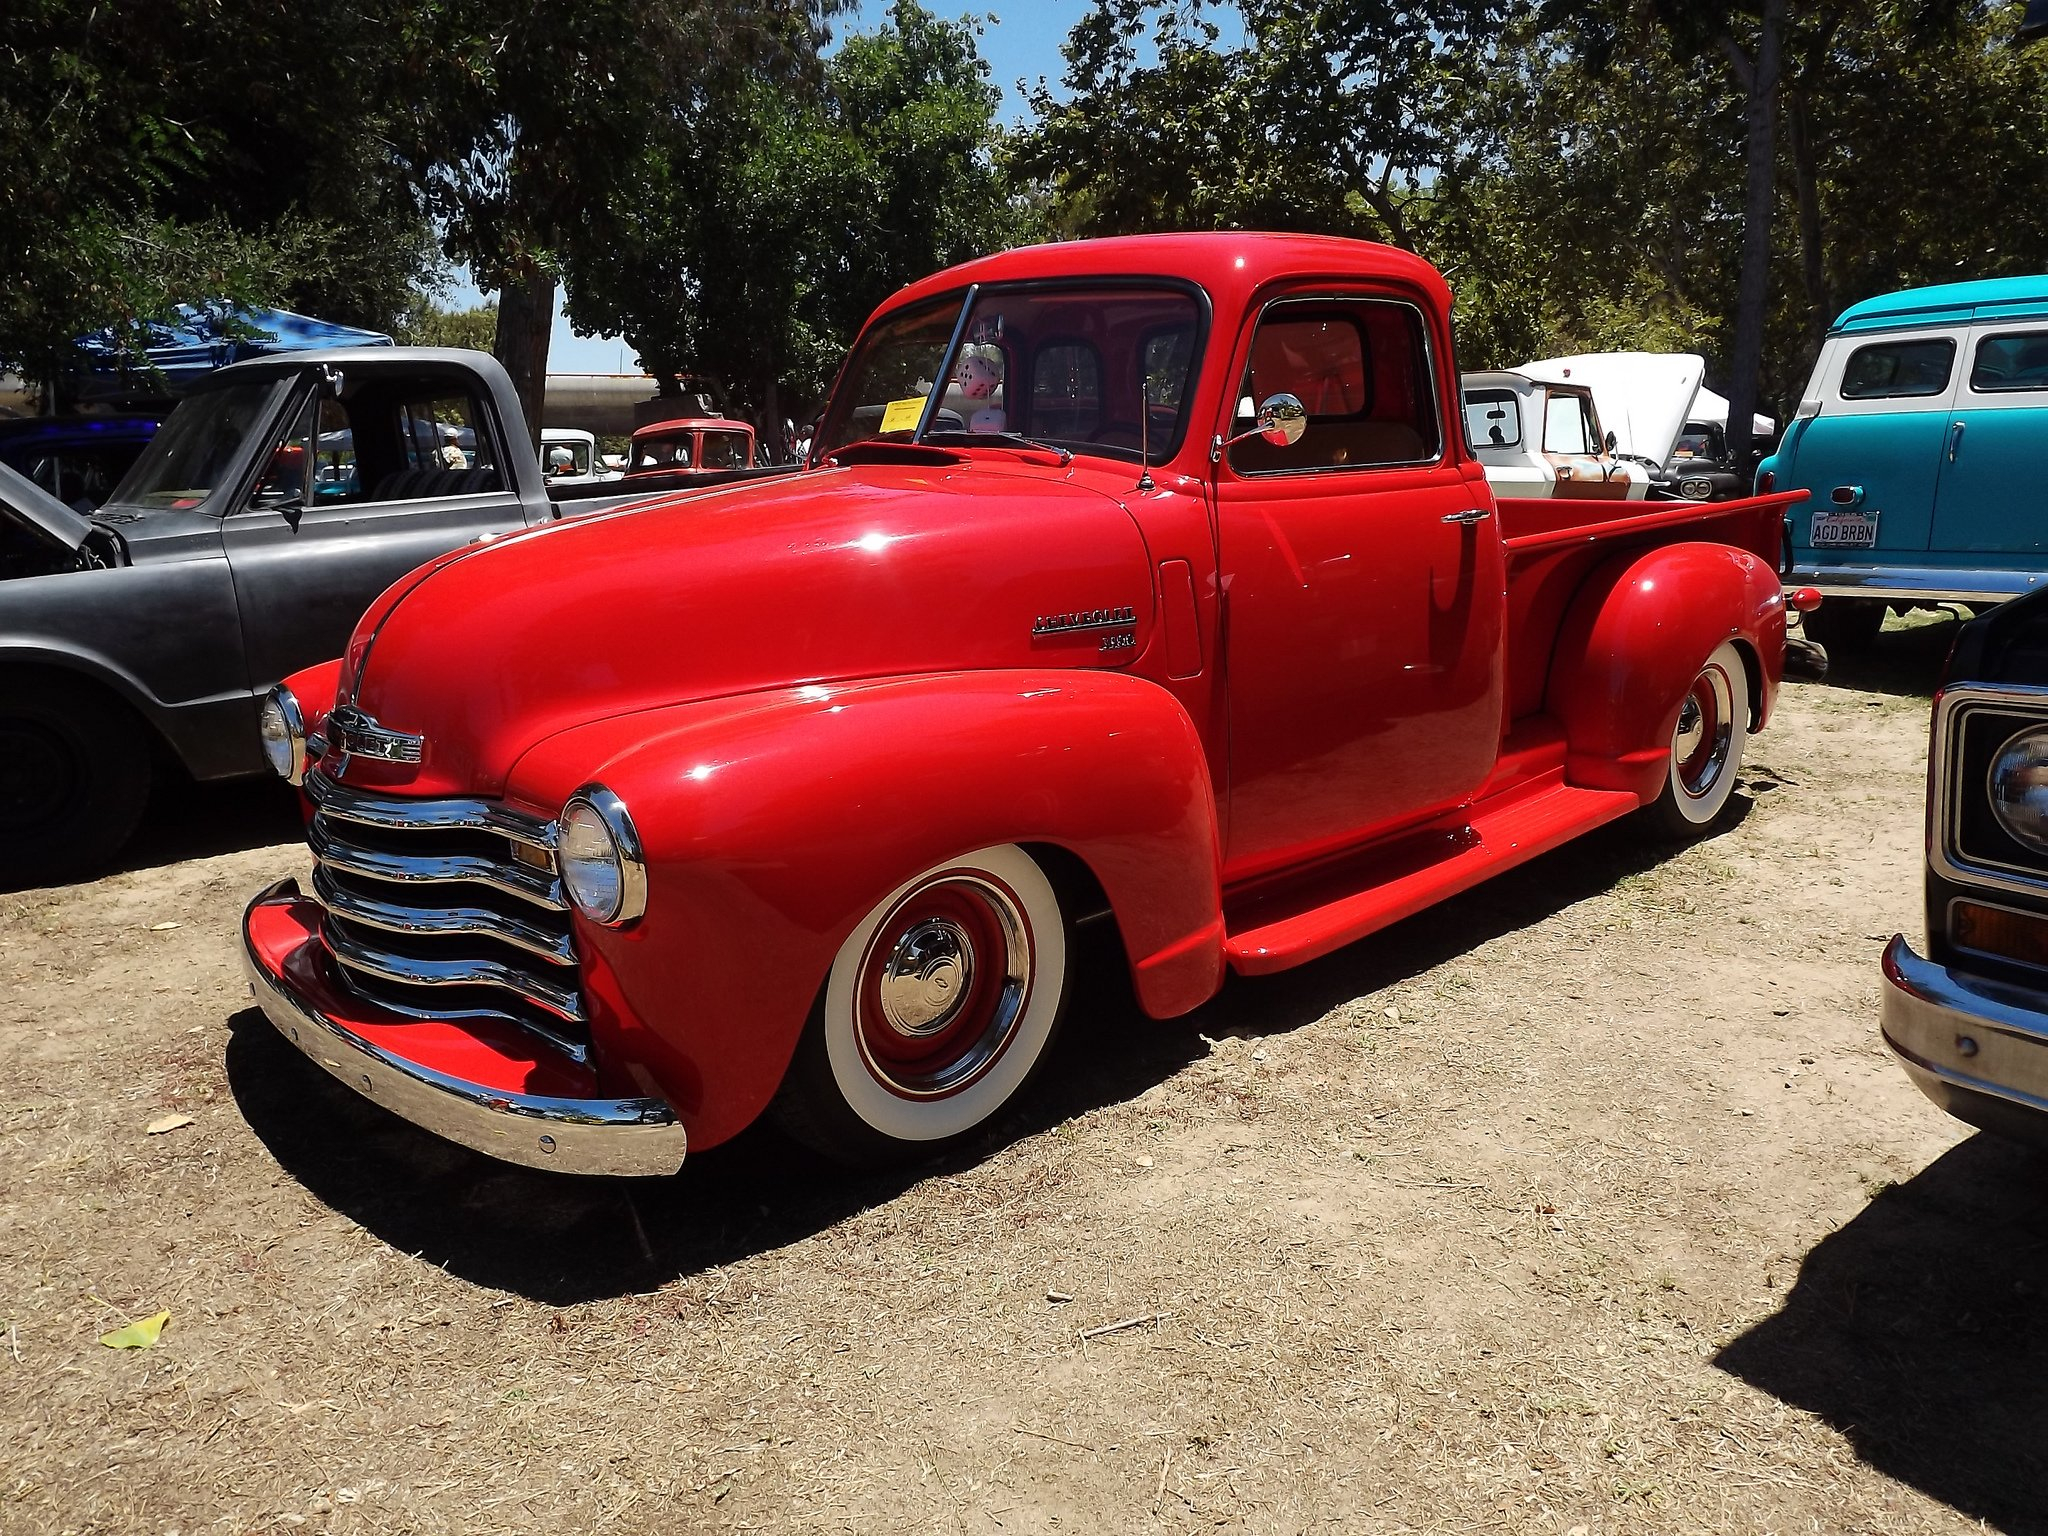 2048x1536 Free download Chevrolet chevy old classic custom cars truck Pickup wallpaper [] for your Desktop, Mobile \u0026 Tablet | Explore 38+ Old Chevy Truck Wallpaper | GM Cars for Background Wallpaper, Chevy